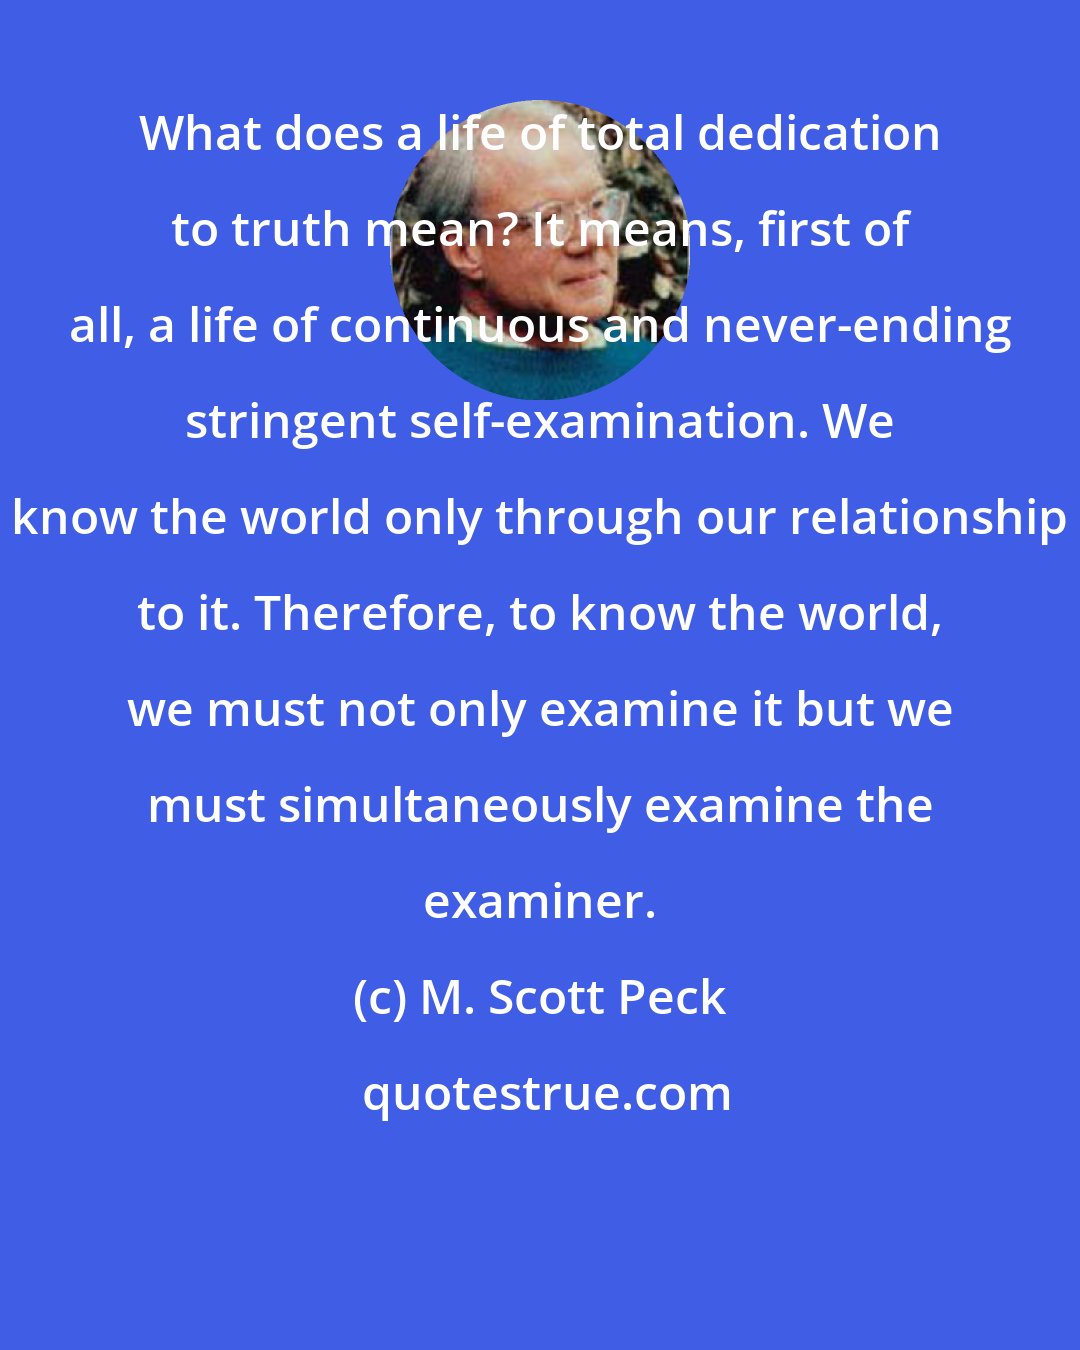 M. Scott Peck: What does a life of total dedication to truth mean? It means, first of all, a life of continuous and never-ending stringent self-examination. We know the world only through our relationship to it. Therefore, to know the world, we must not only examine it but we must simultaneously examine the examiner.